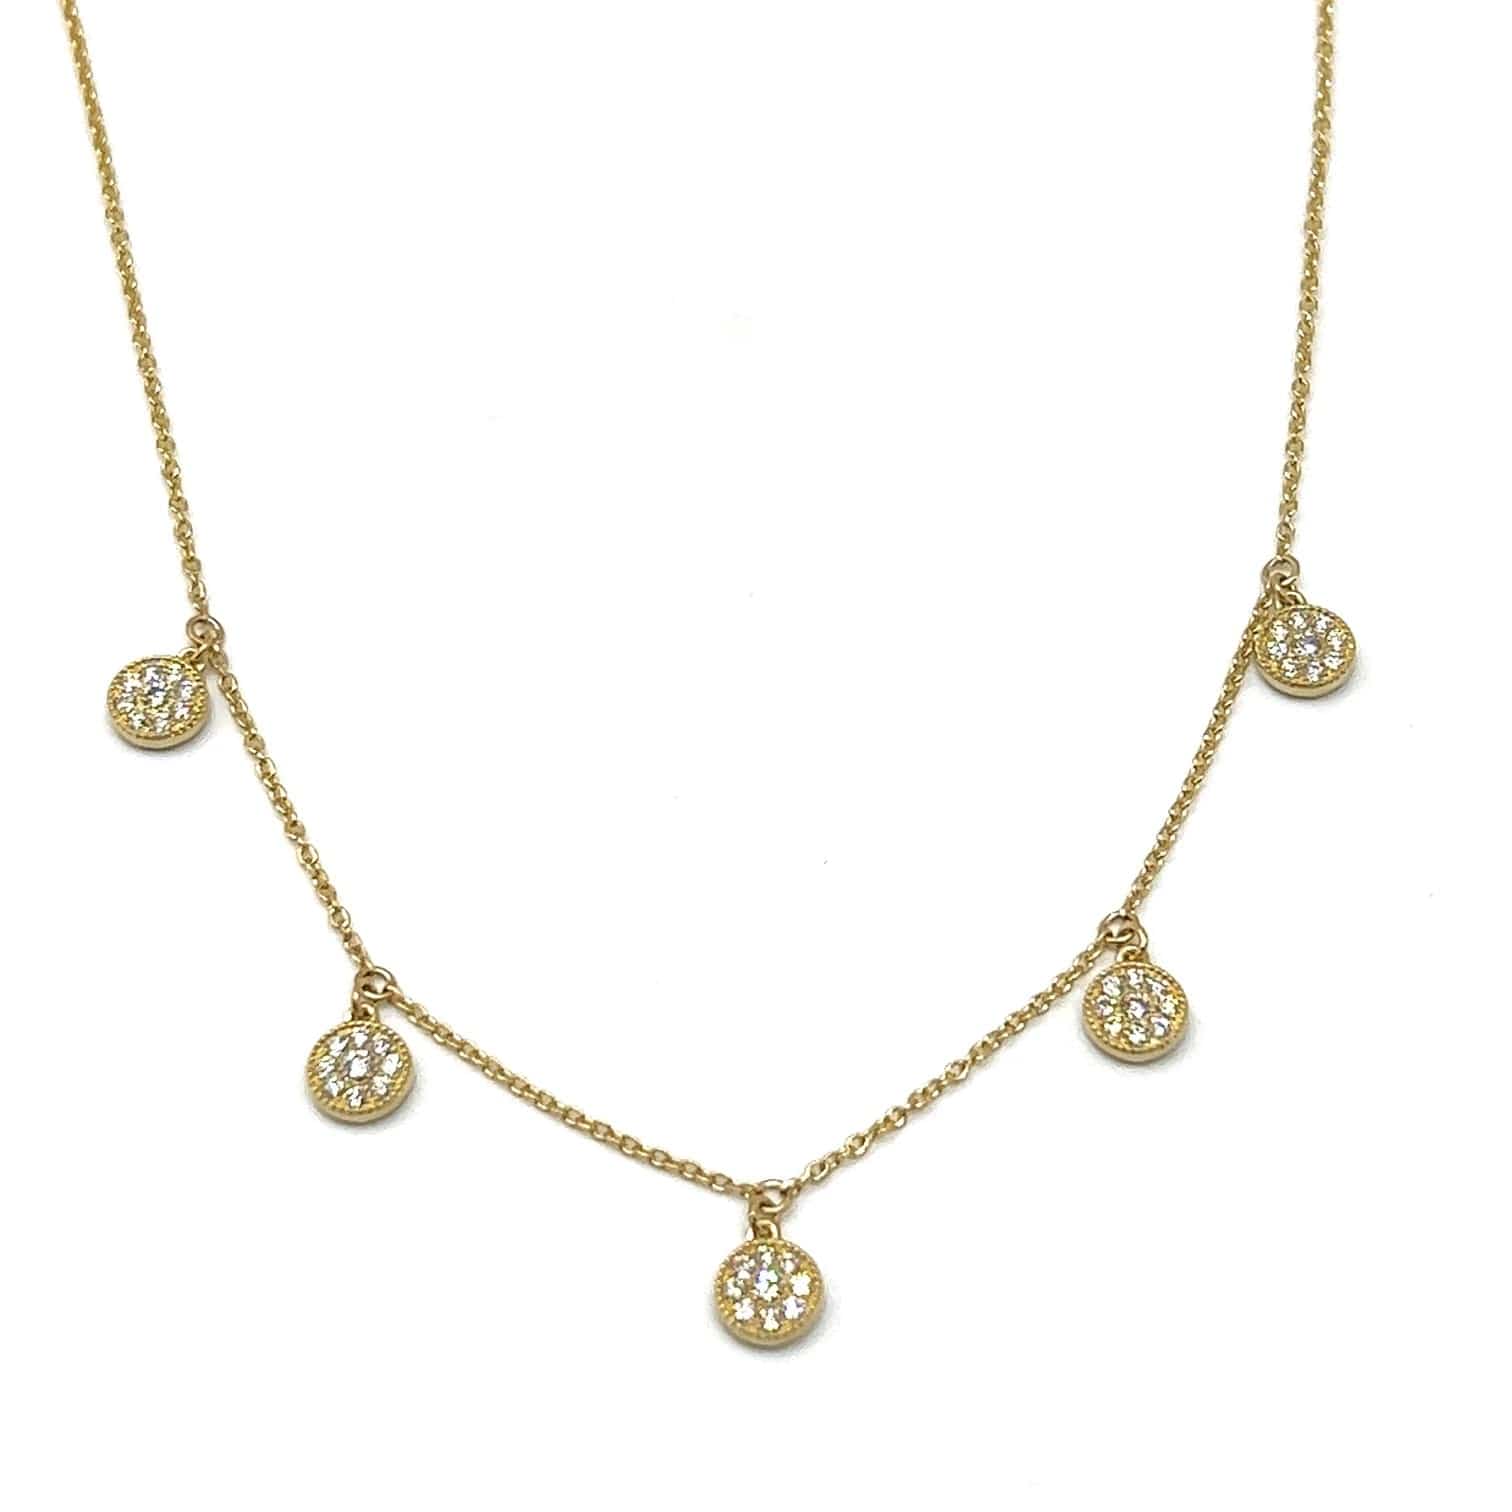 5 Charm Opera Necklace - Coomi